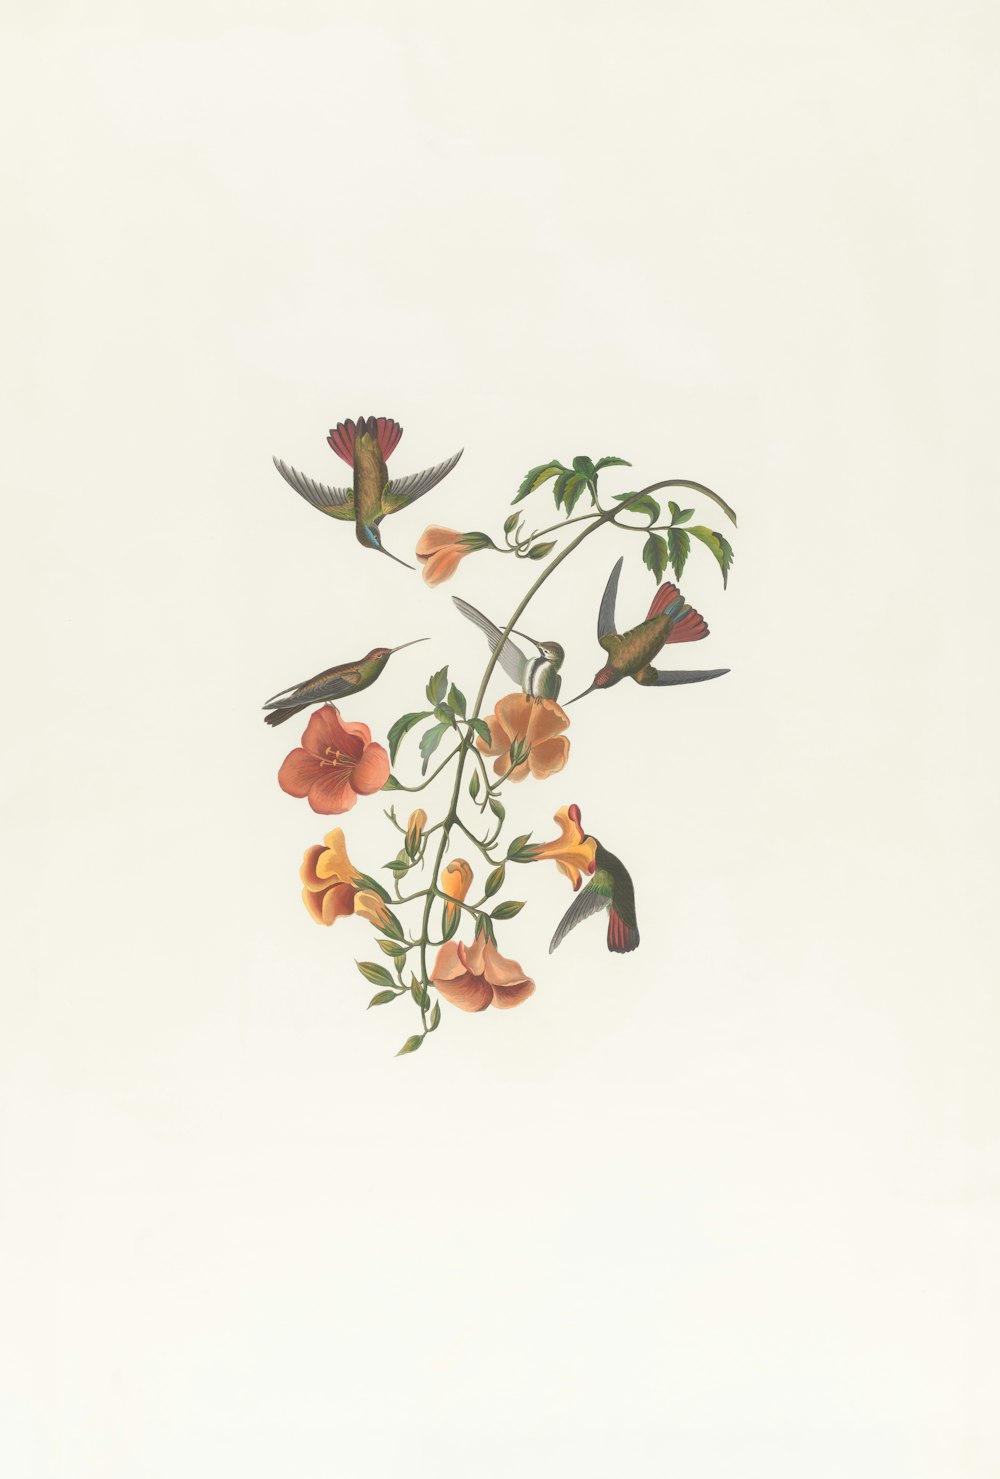 a painting of a hummingbird on a branch with orange flowers